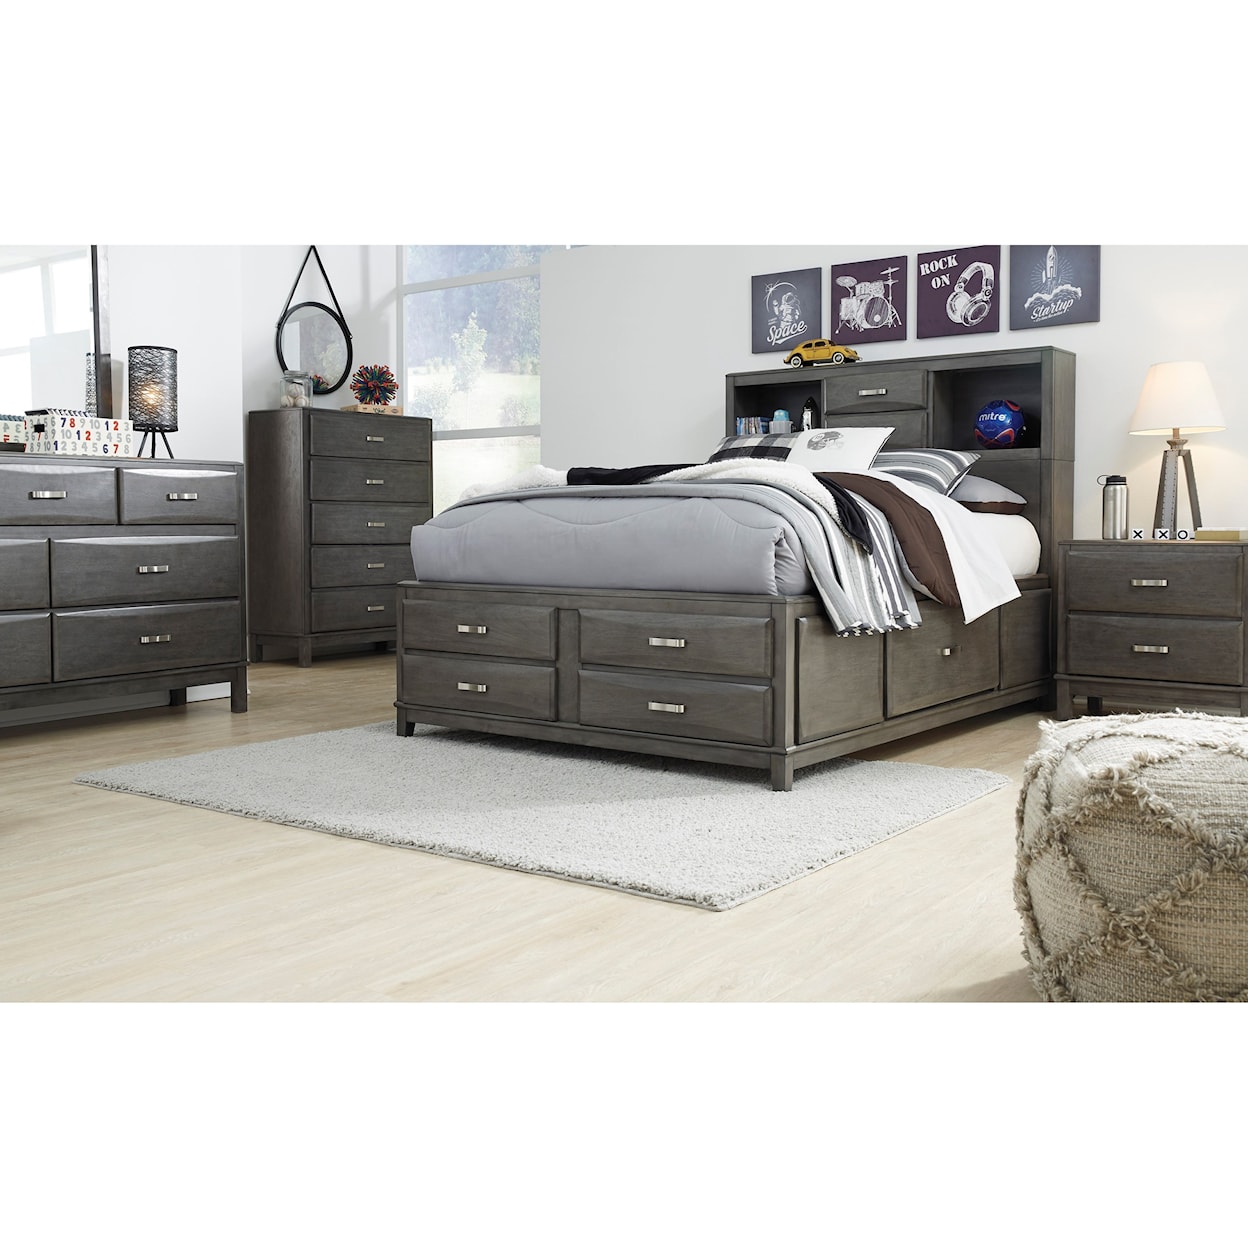 StyleLine Caitbrook Full Storage Bed with 7 Drawers